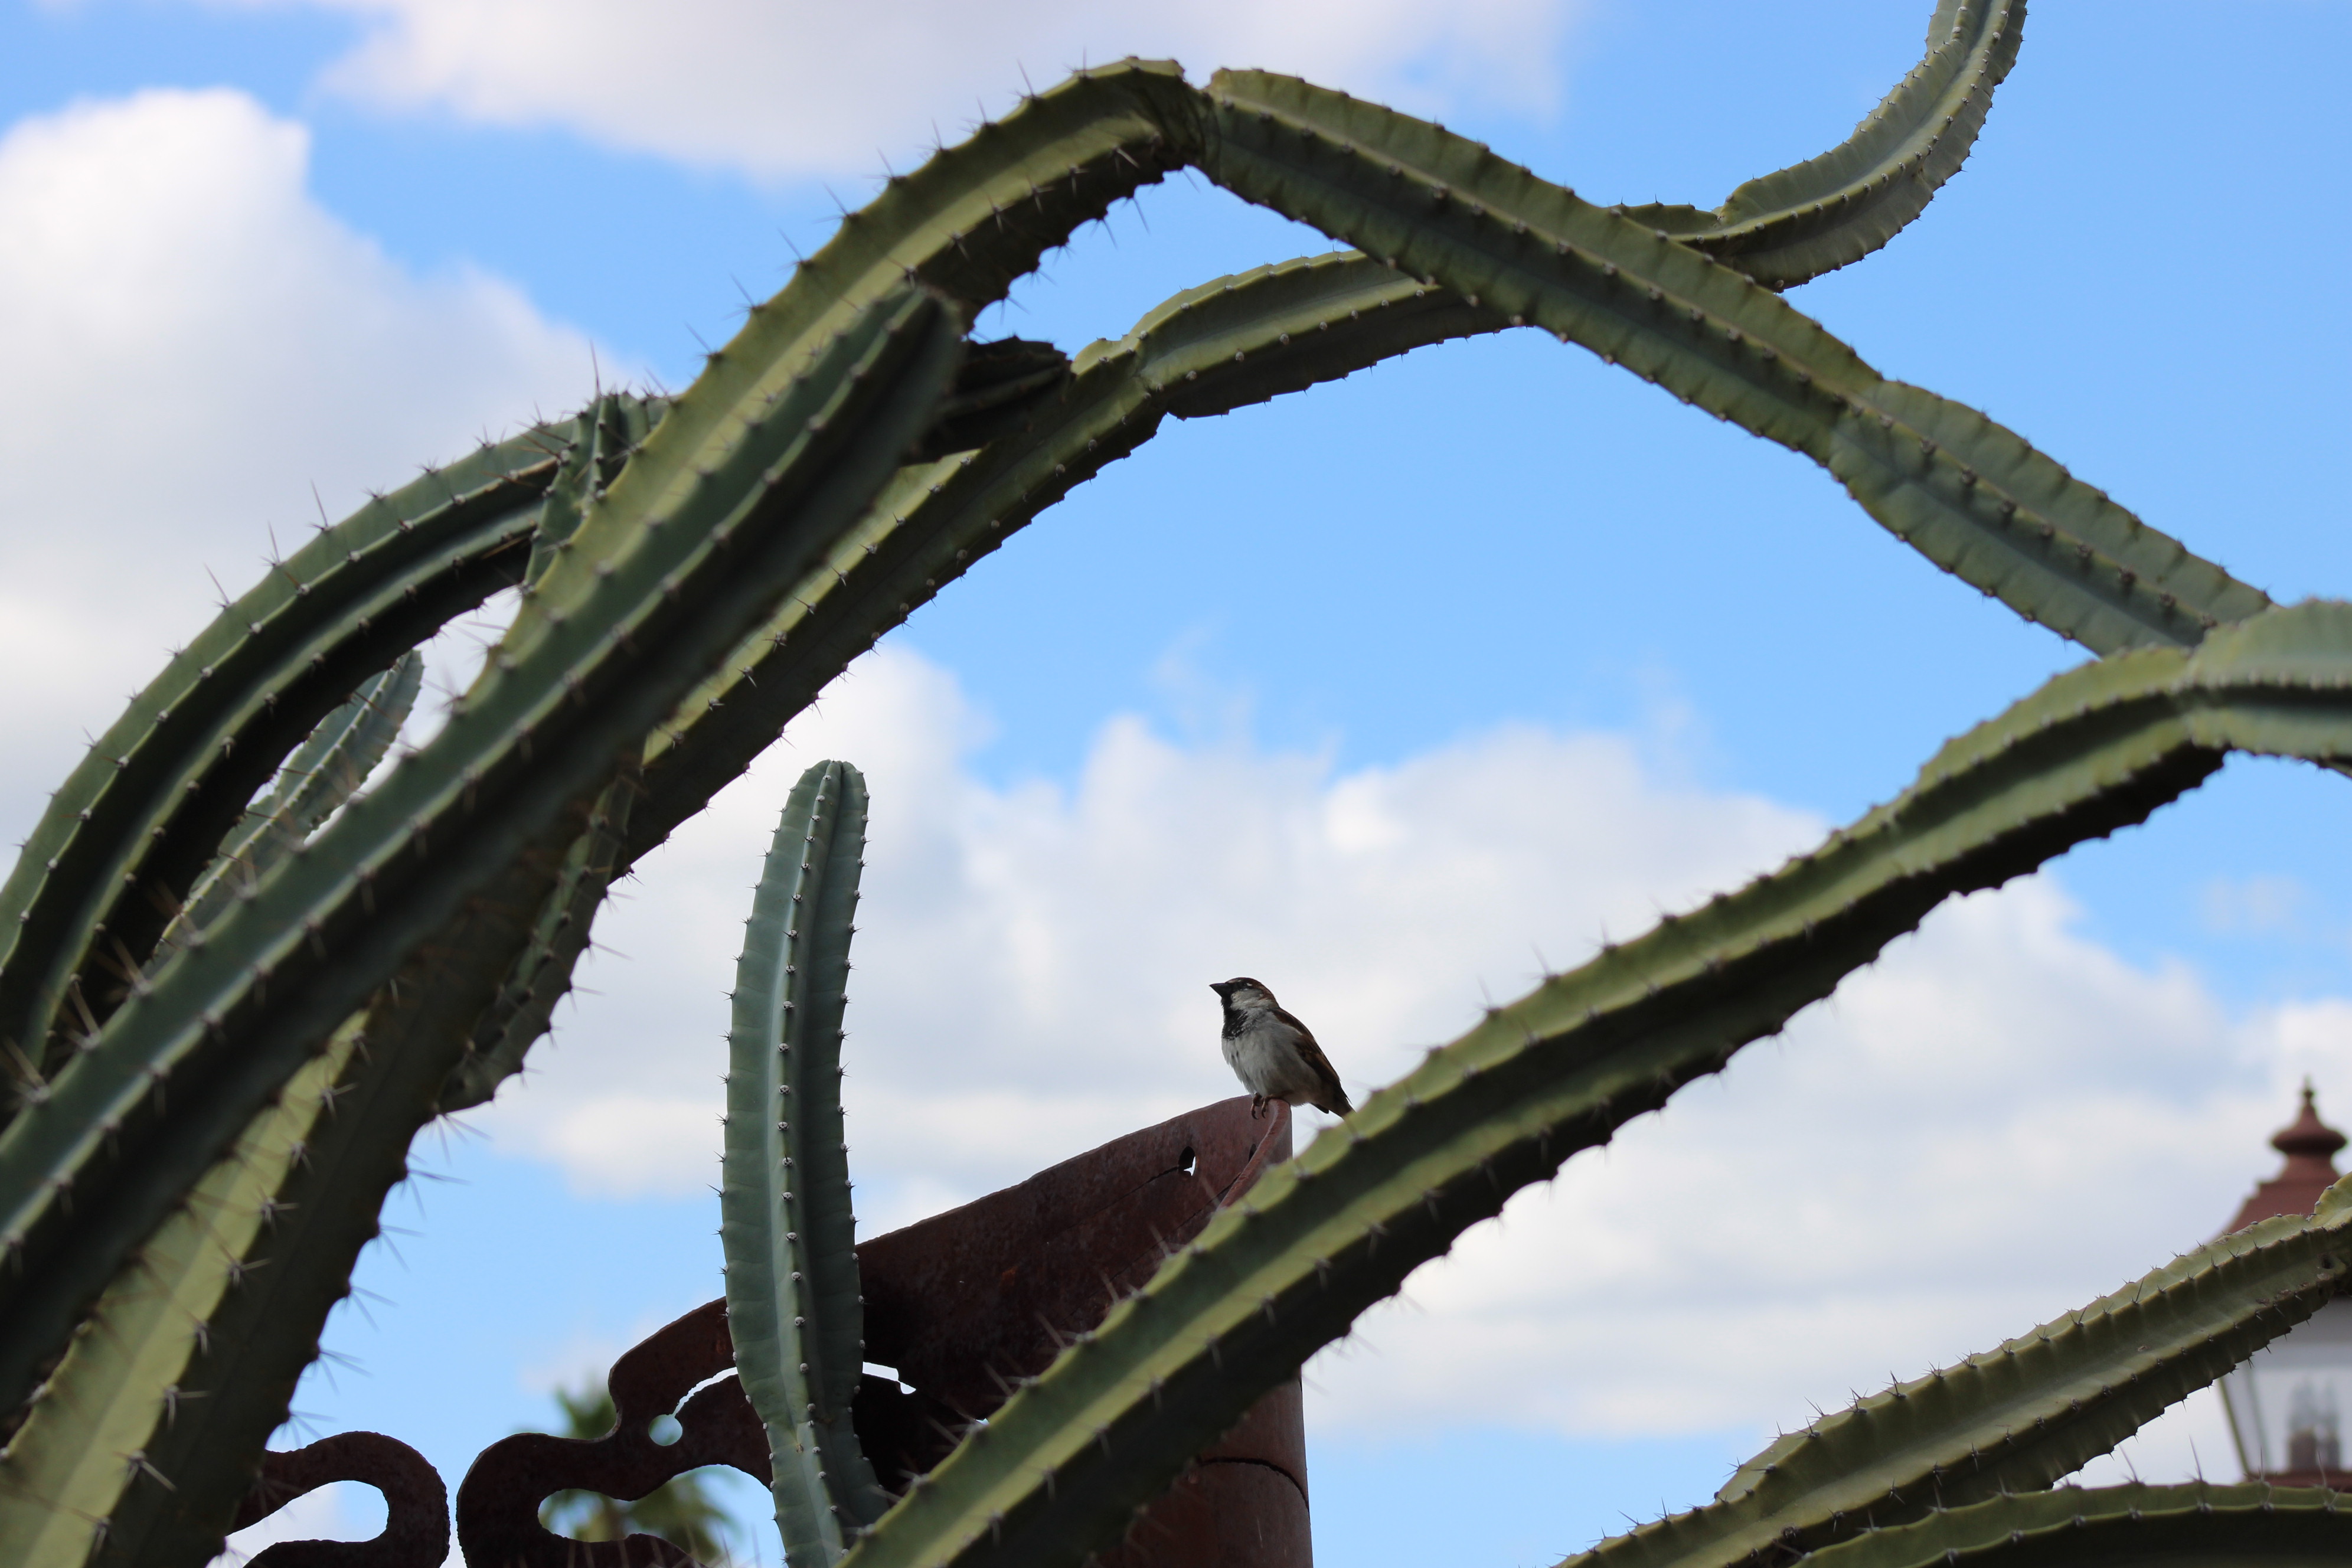 Sparrow on an art statue surrounded by cacti